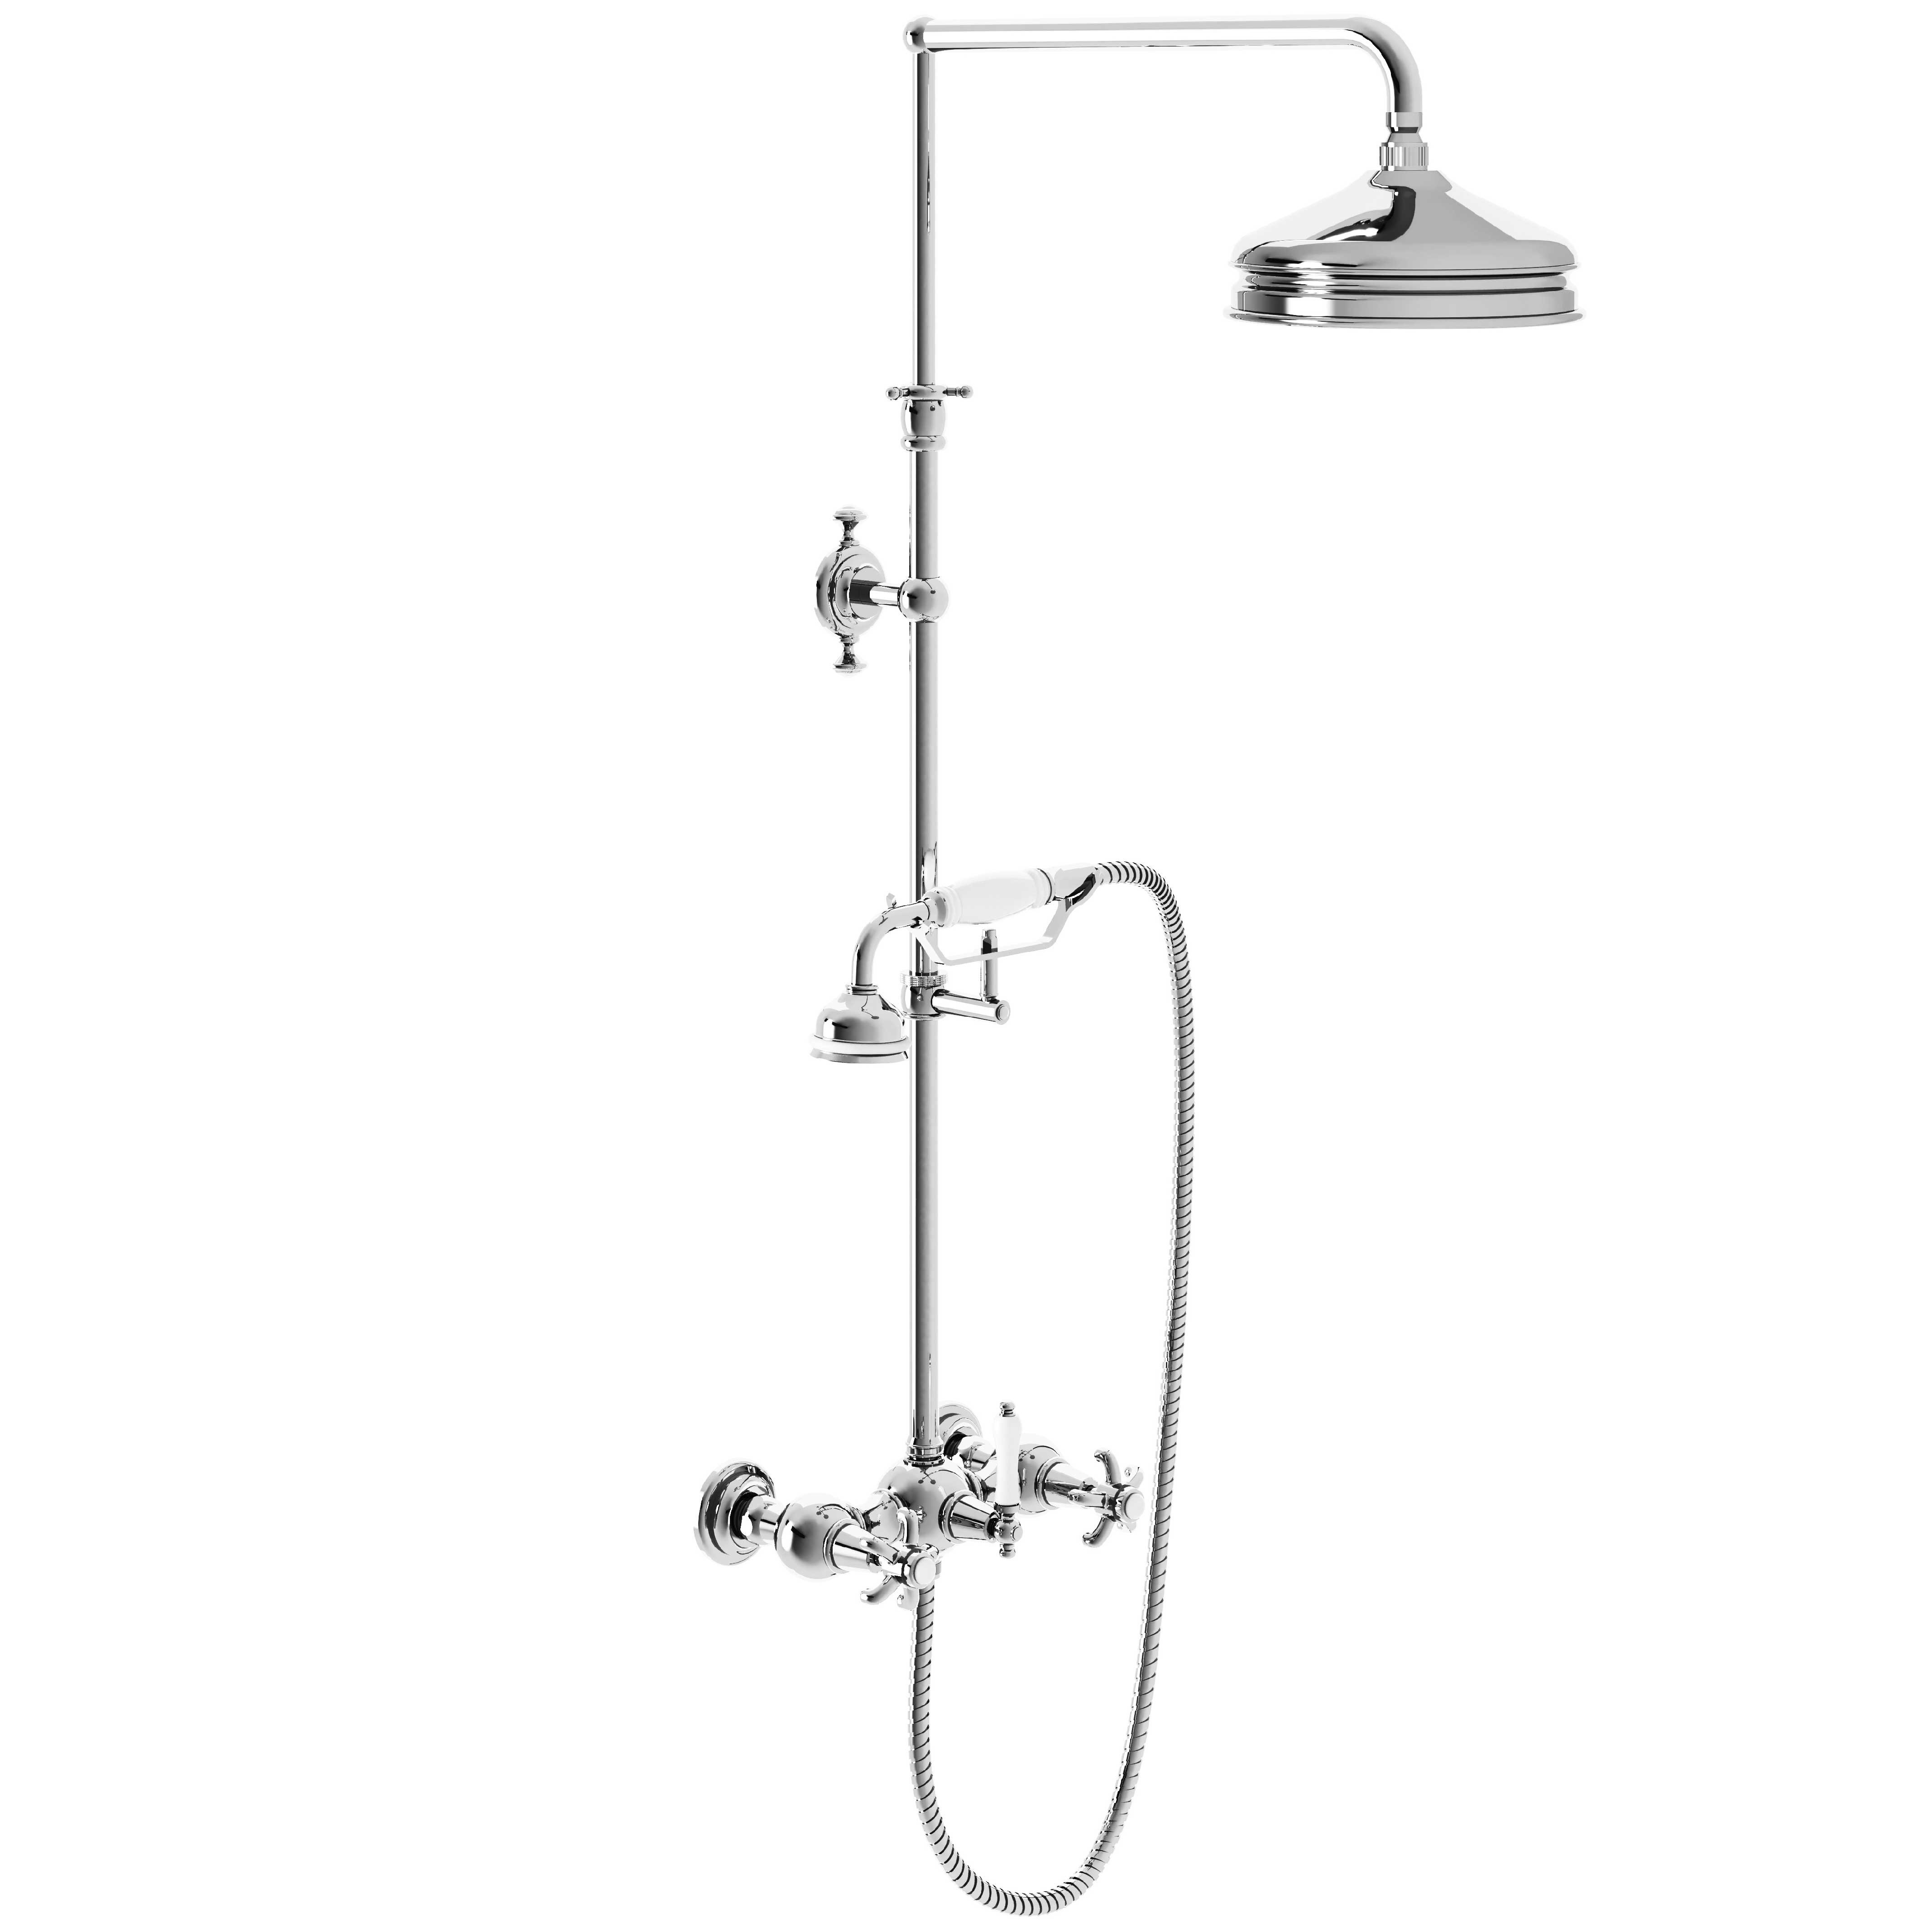 M01-2204 Shower mixer with column, anti-scaling